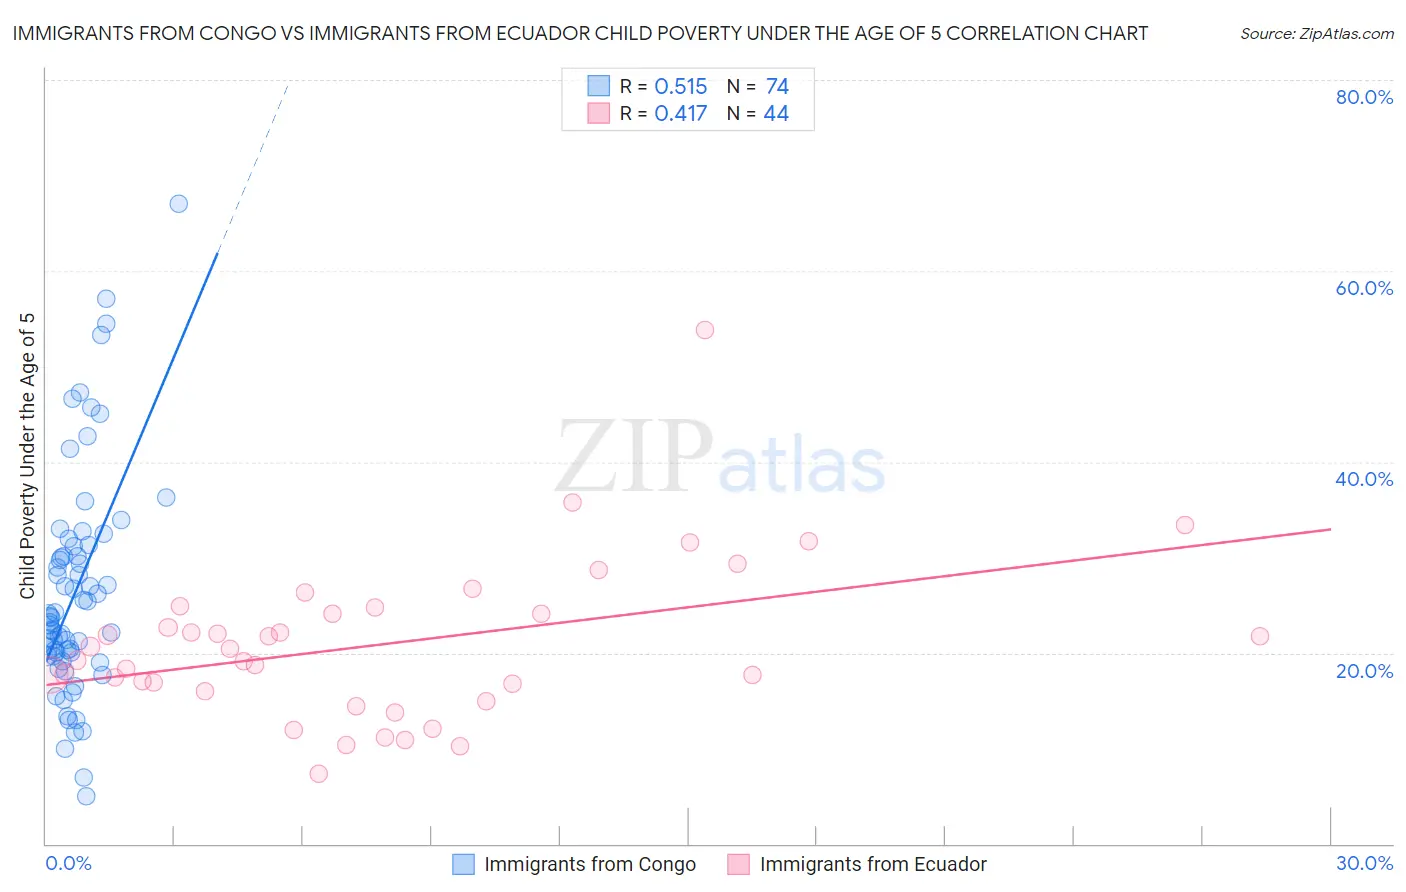 Immigrants from Congo vs Immigrants from Ecuador Child Poverty Under the Age of 5